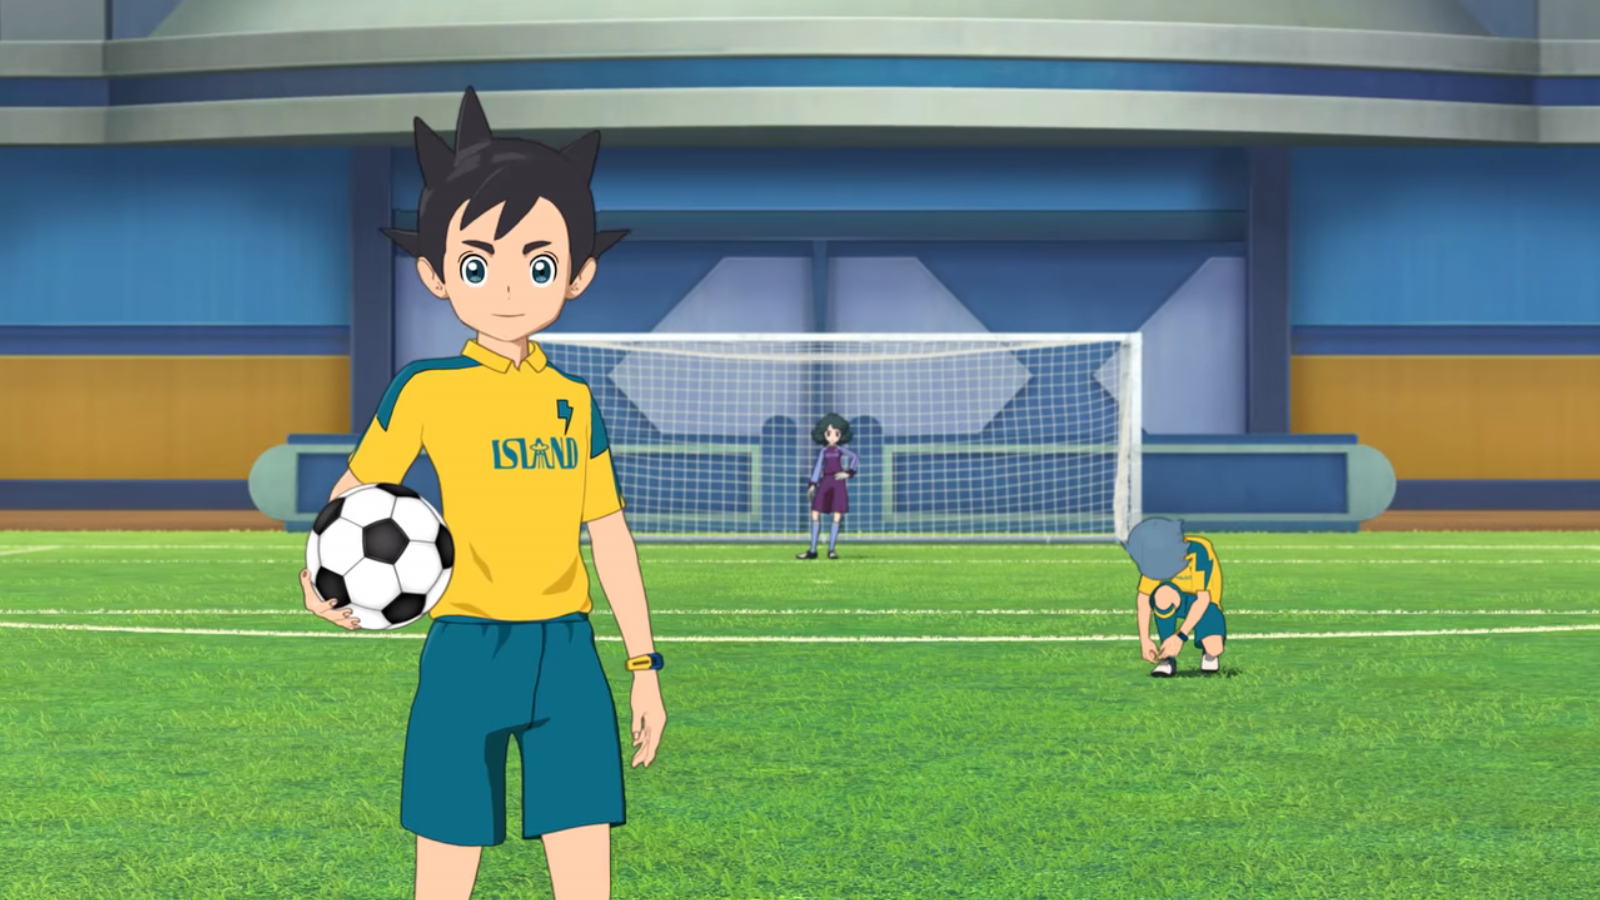 inazuma eleven ares characters